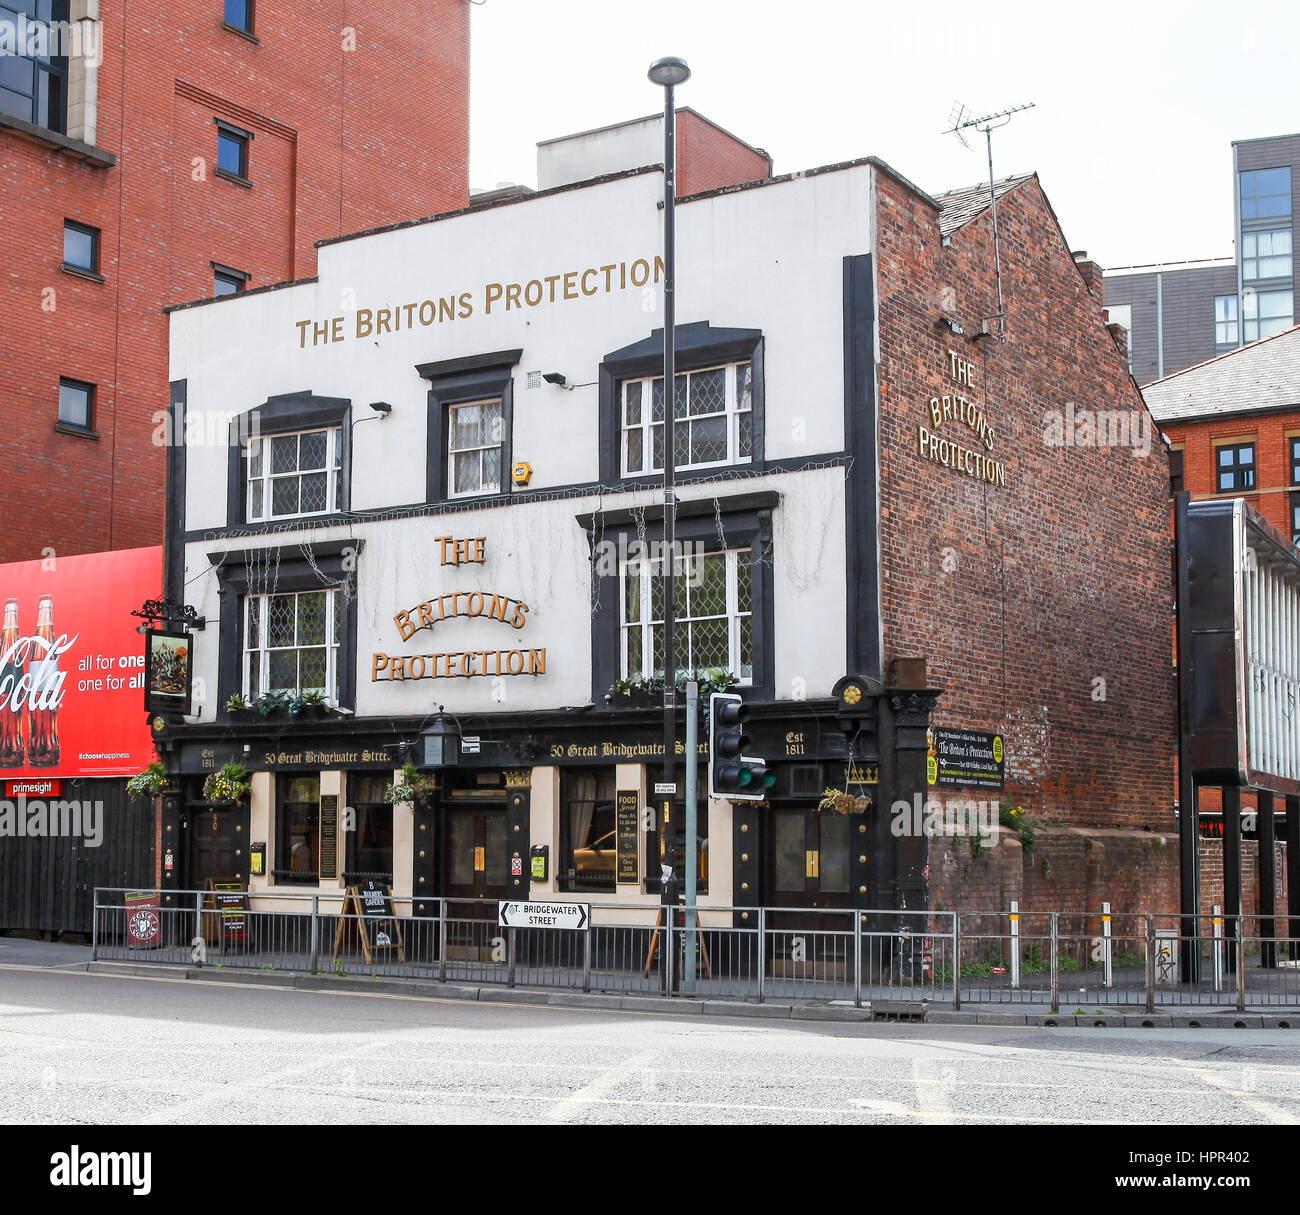 The Briton's Protection is an historic, grade II listed public house or pub in central Manchester, England, UK Stock Photo